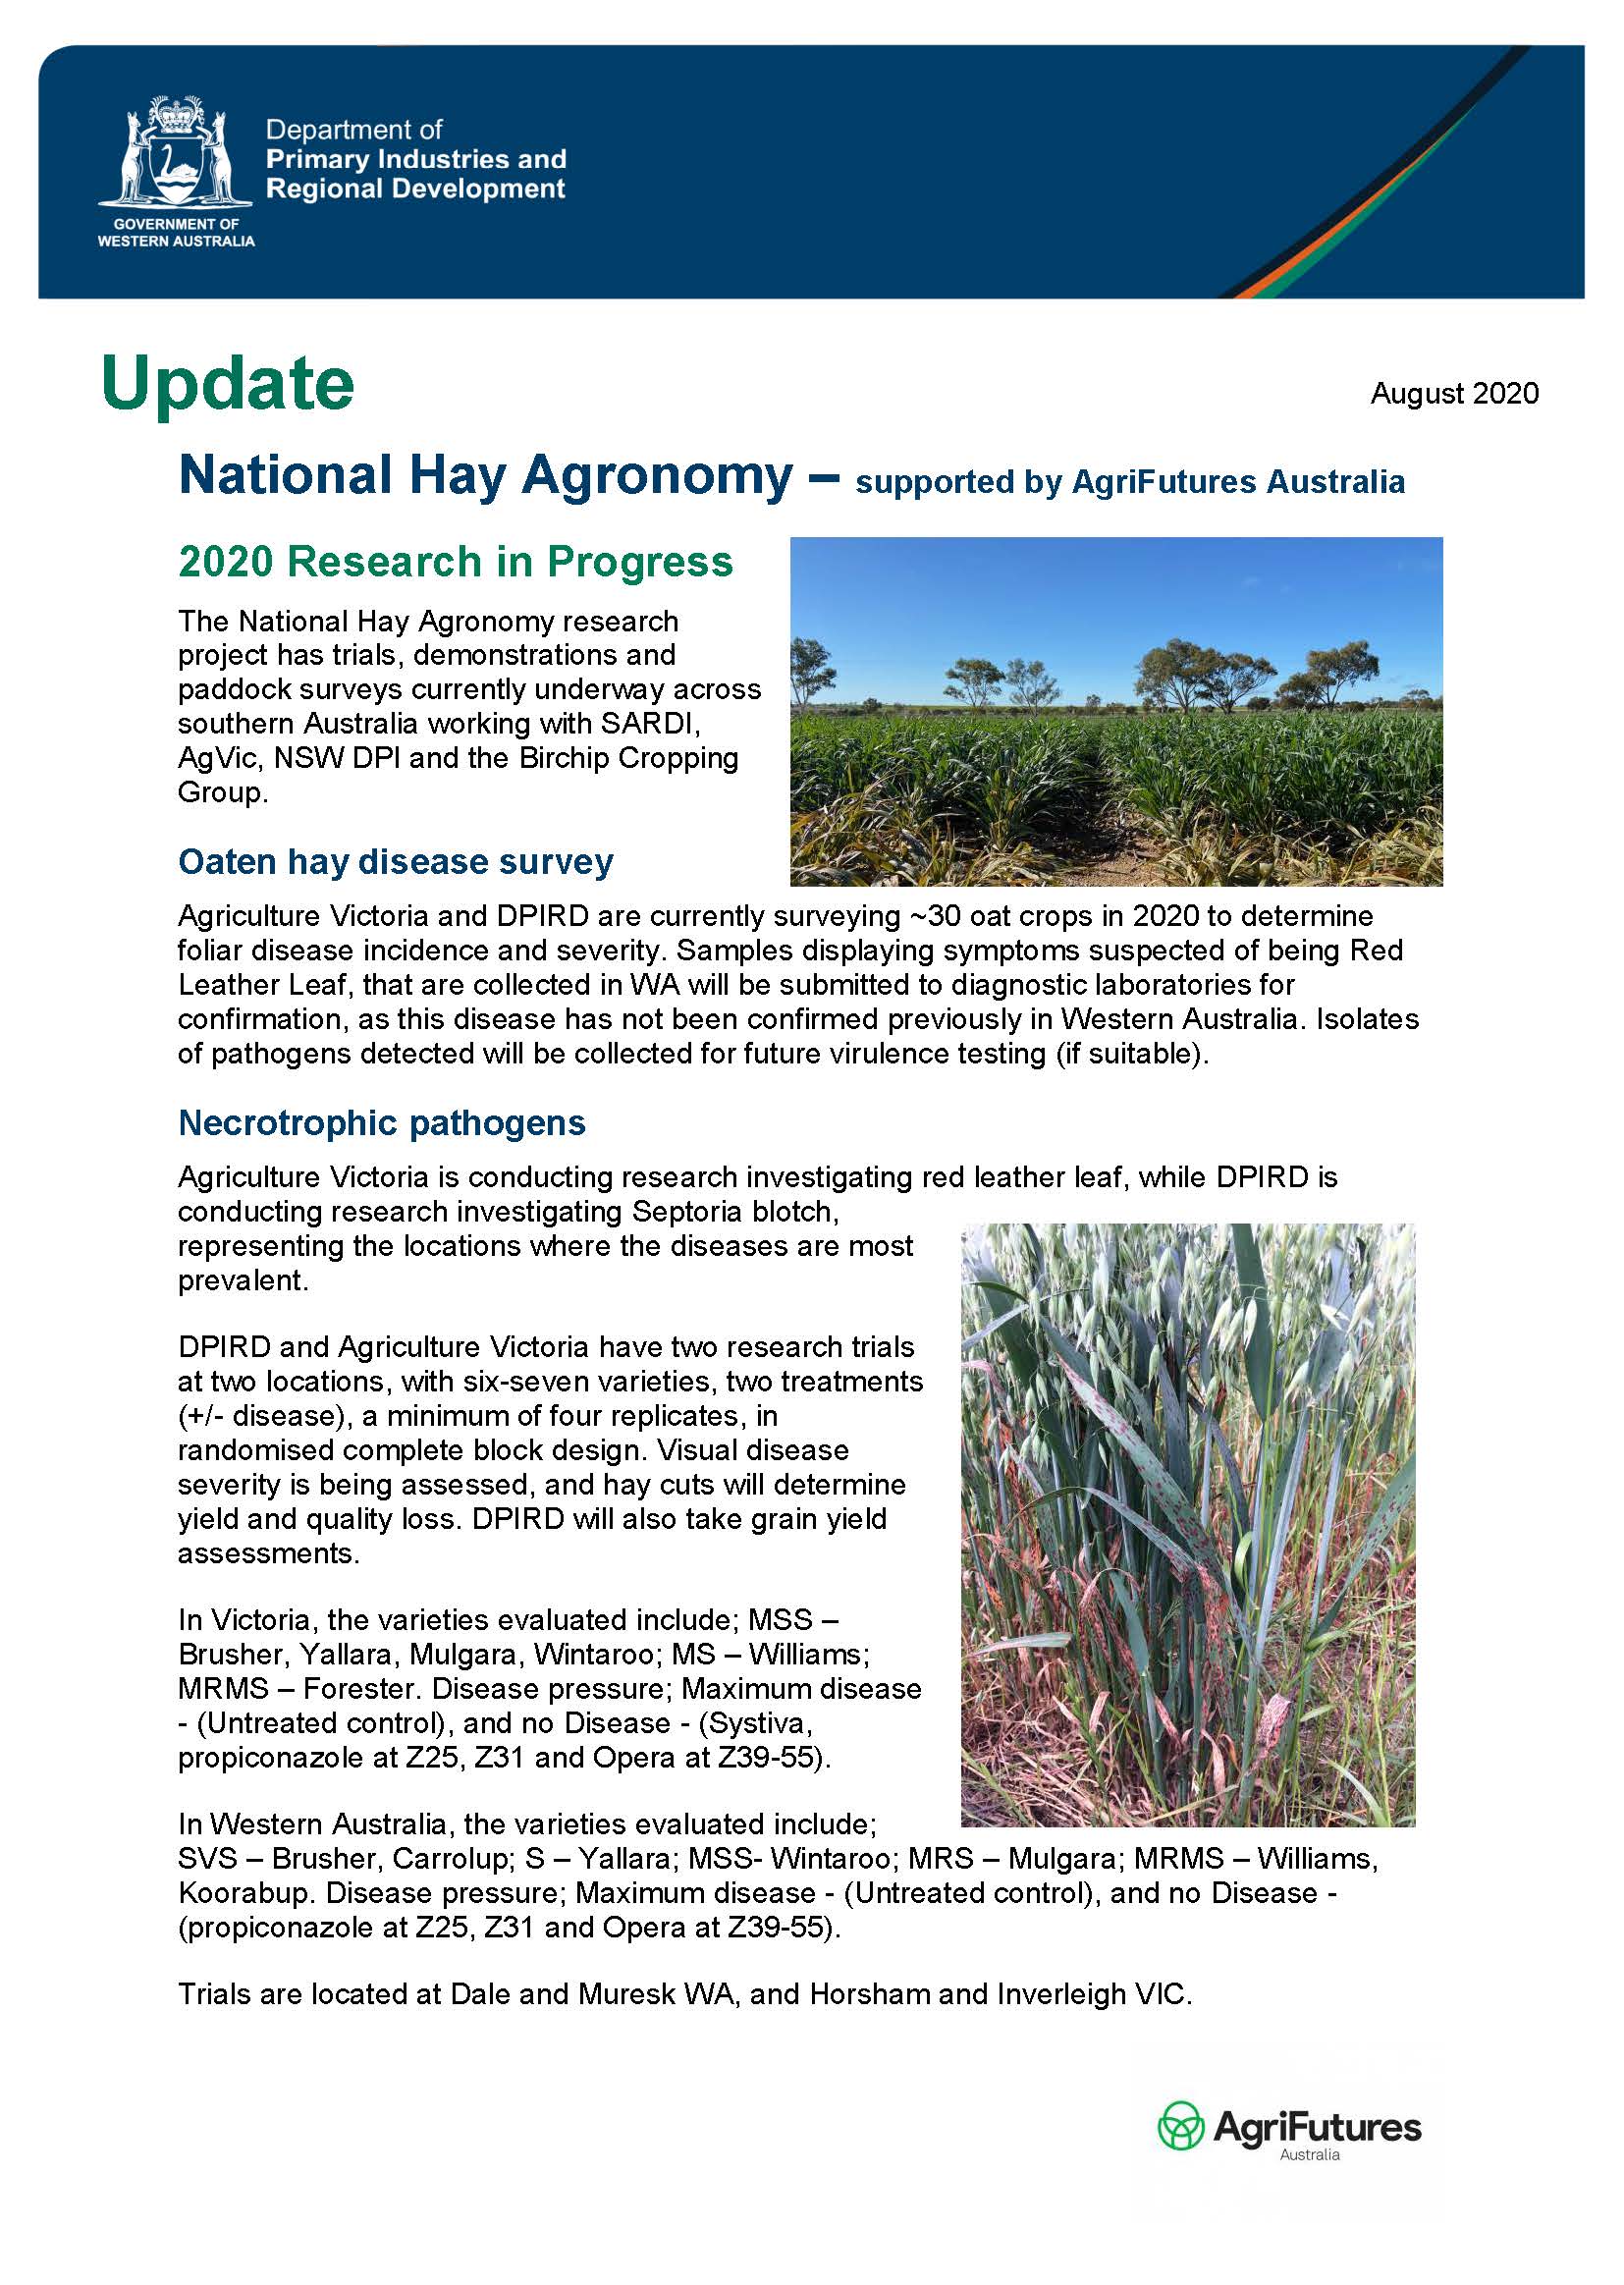 National Hay Agronomy: August 2020 Research in Progress - image